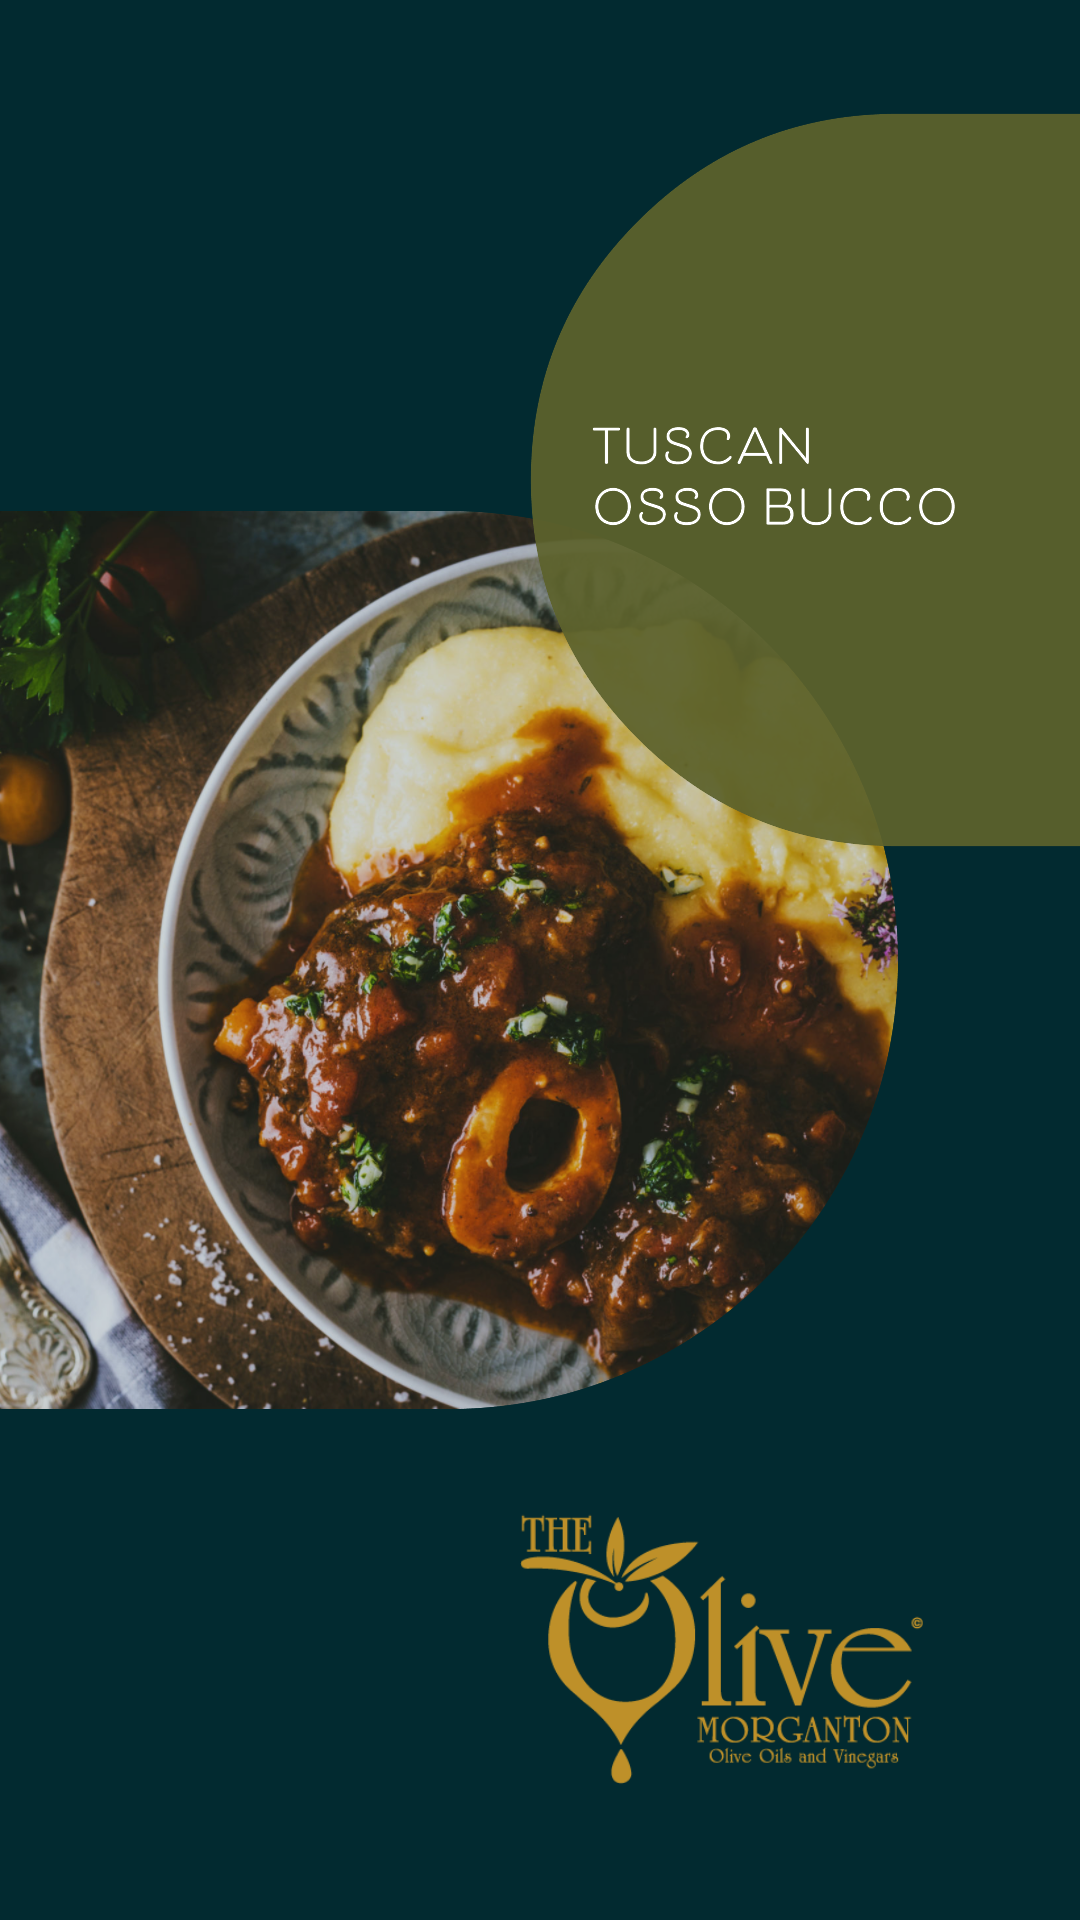 The Olive Tuscan Osso Bucco